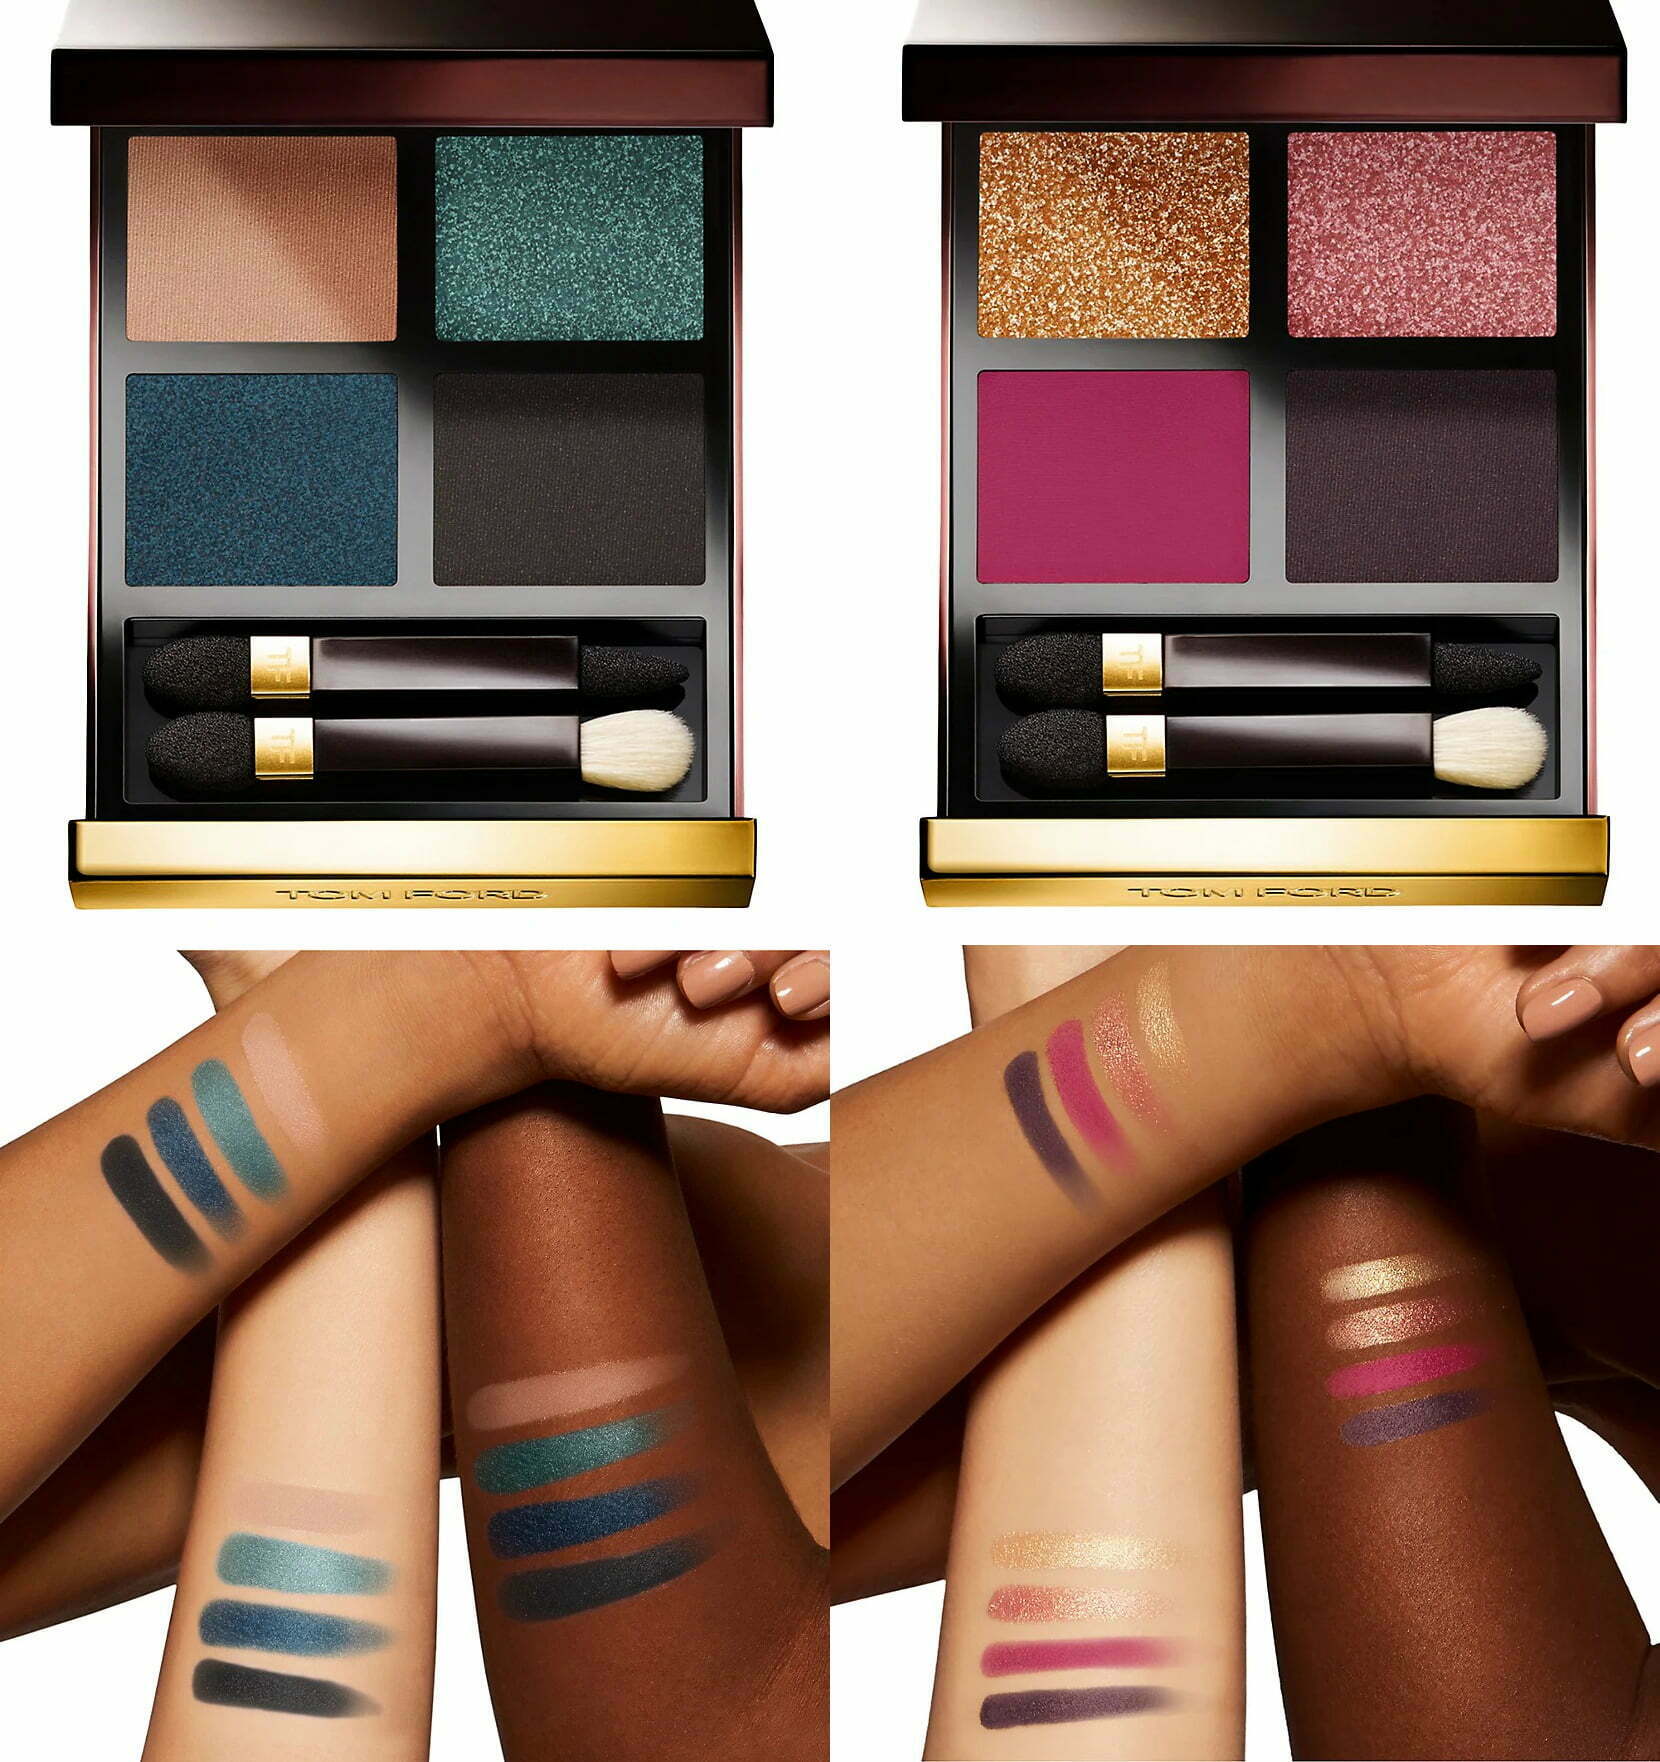 Tom Ford has realesed two new Eye Color Quad Palettes